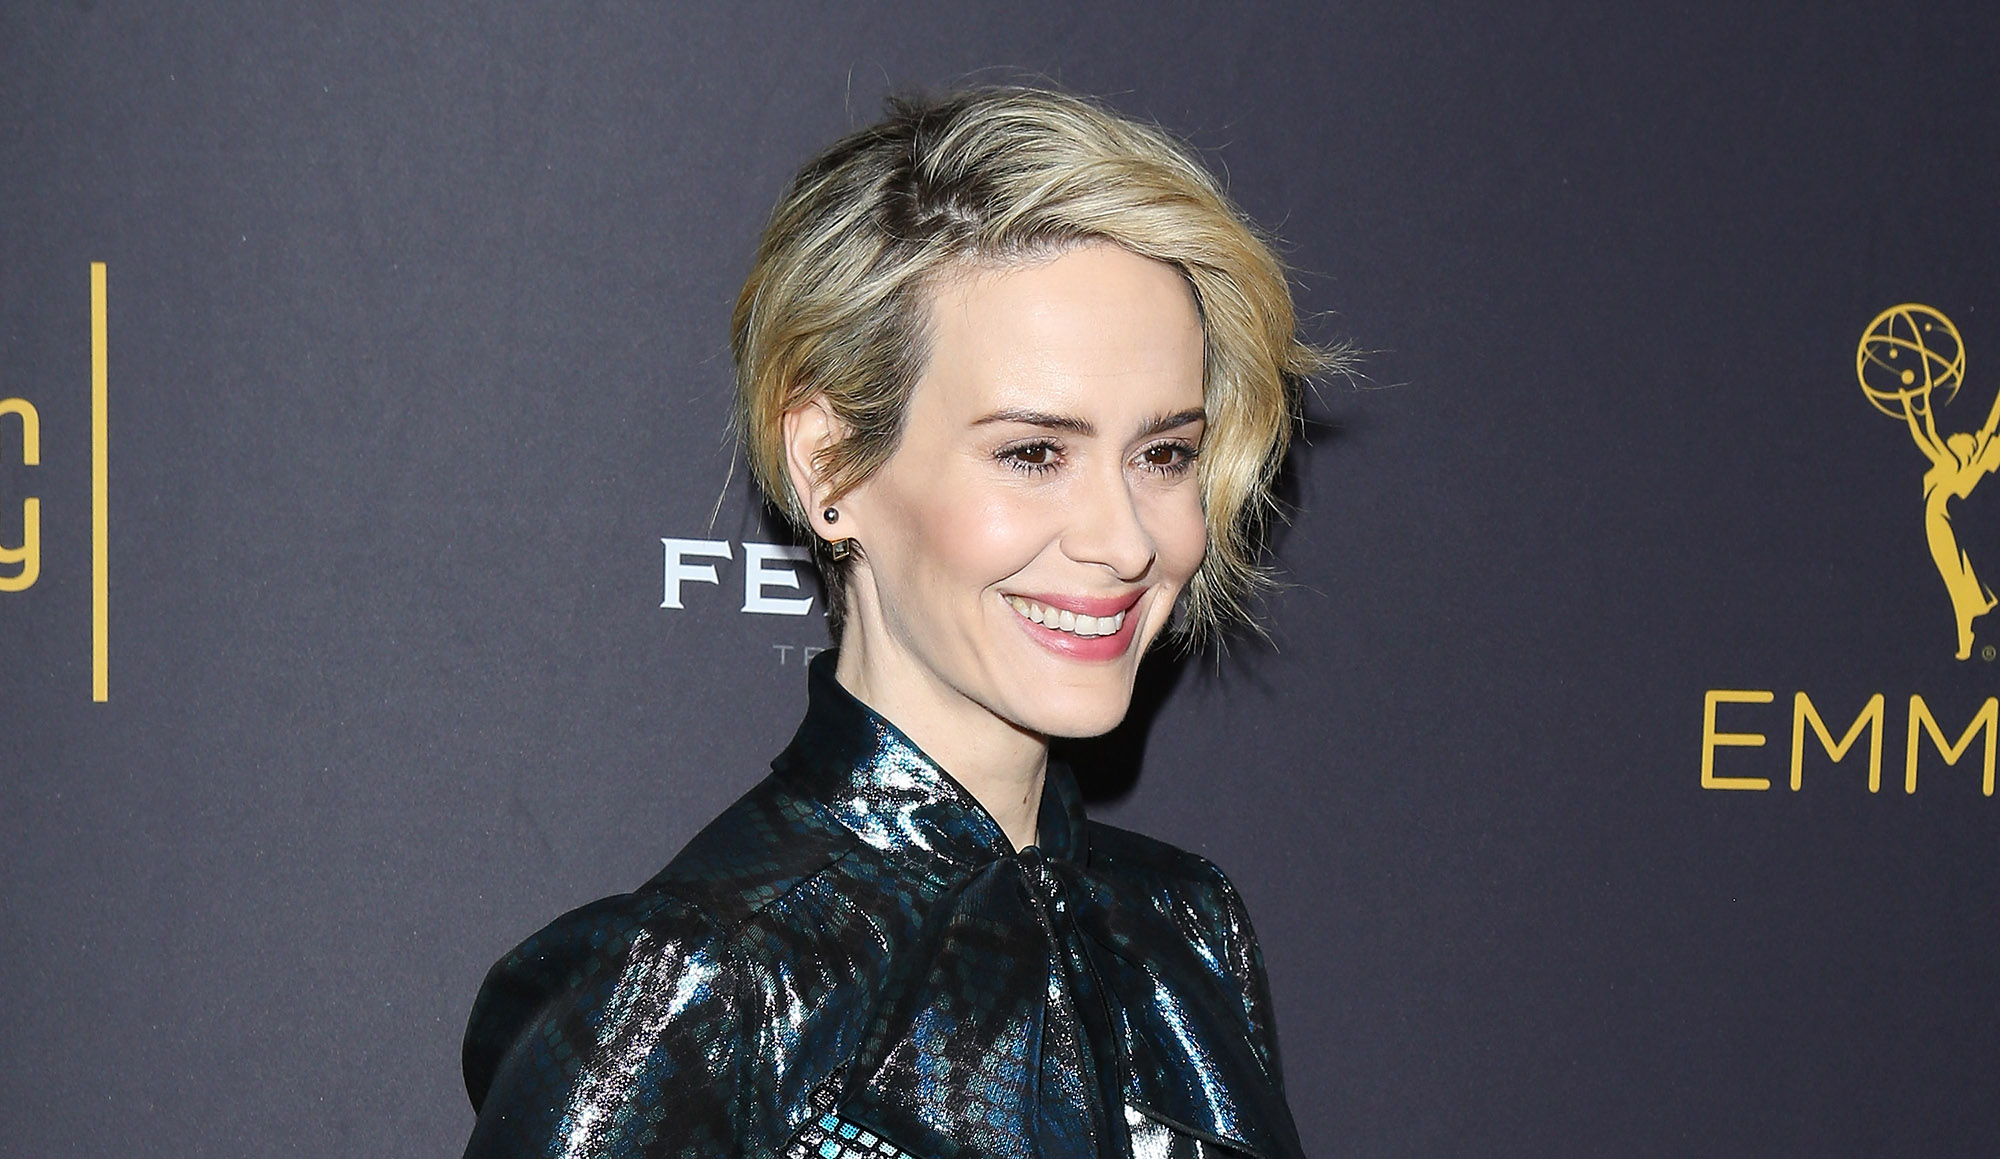 Sarah Paulson attends the Television Academy's Performers Peer Group celebration held at Montage Beverly Hills on August 22, 2016 in Beverly Hills, California.  (Photo by Michael Tran/FilmMagic) (Michael Tran—FilmMagic)